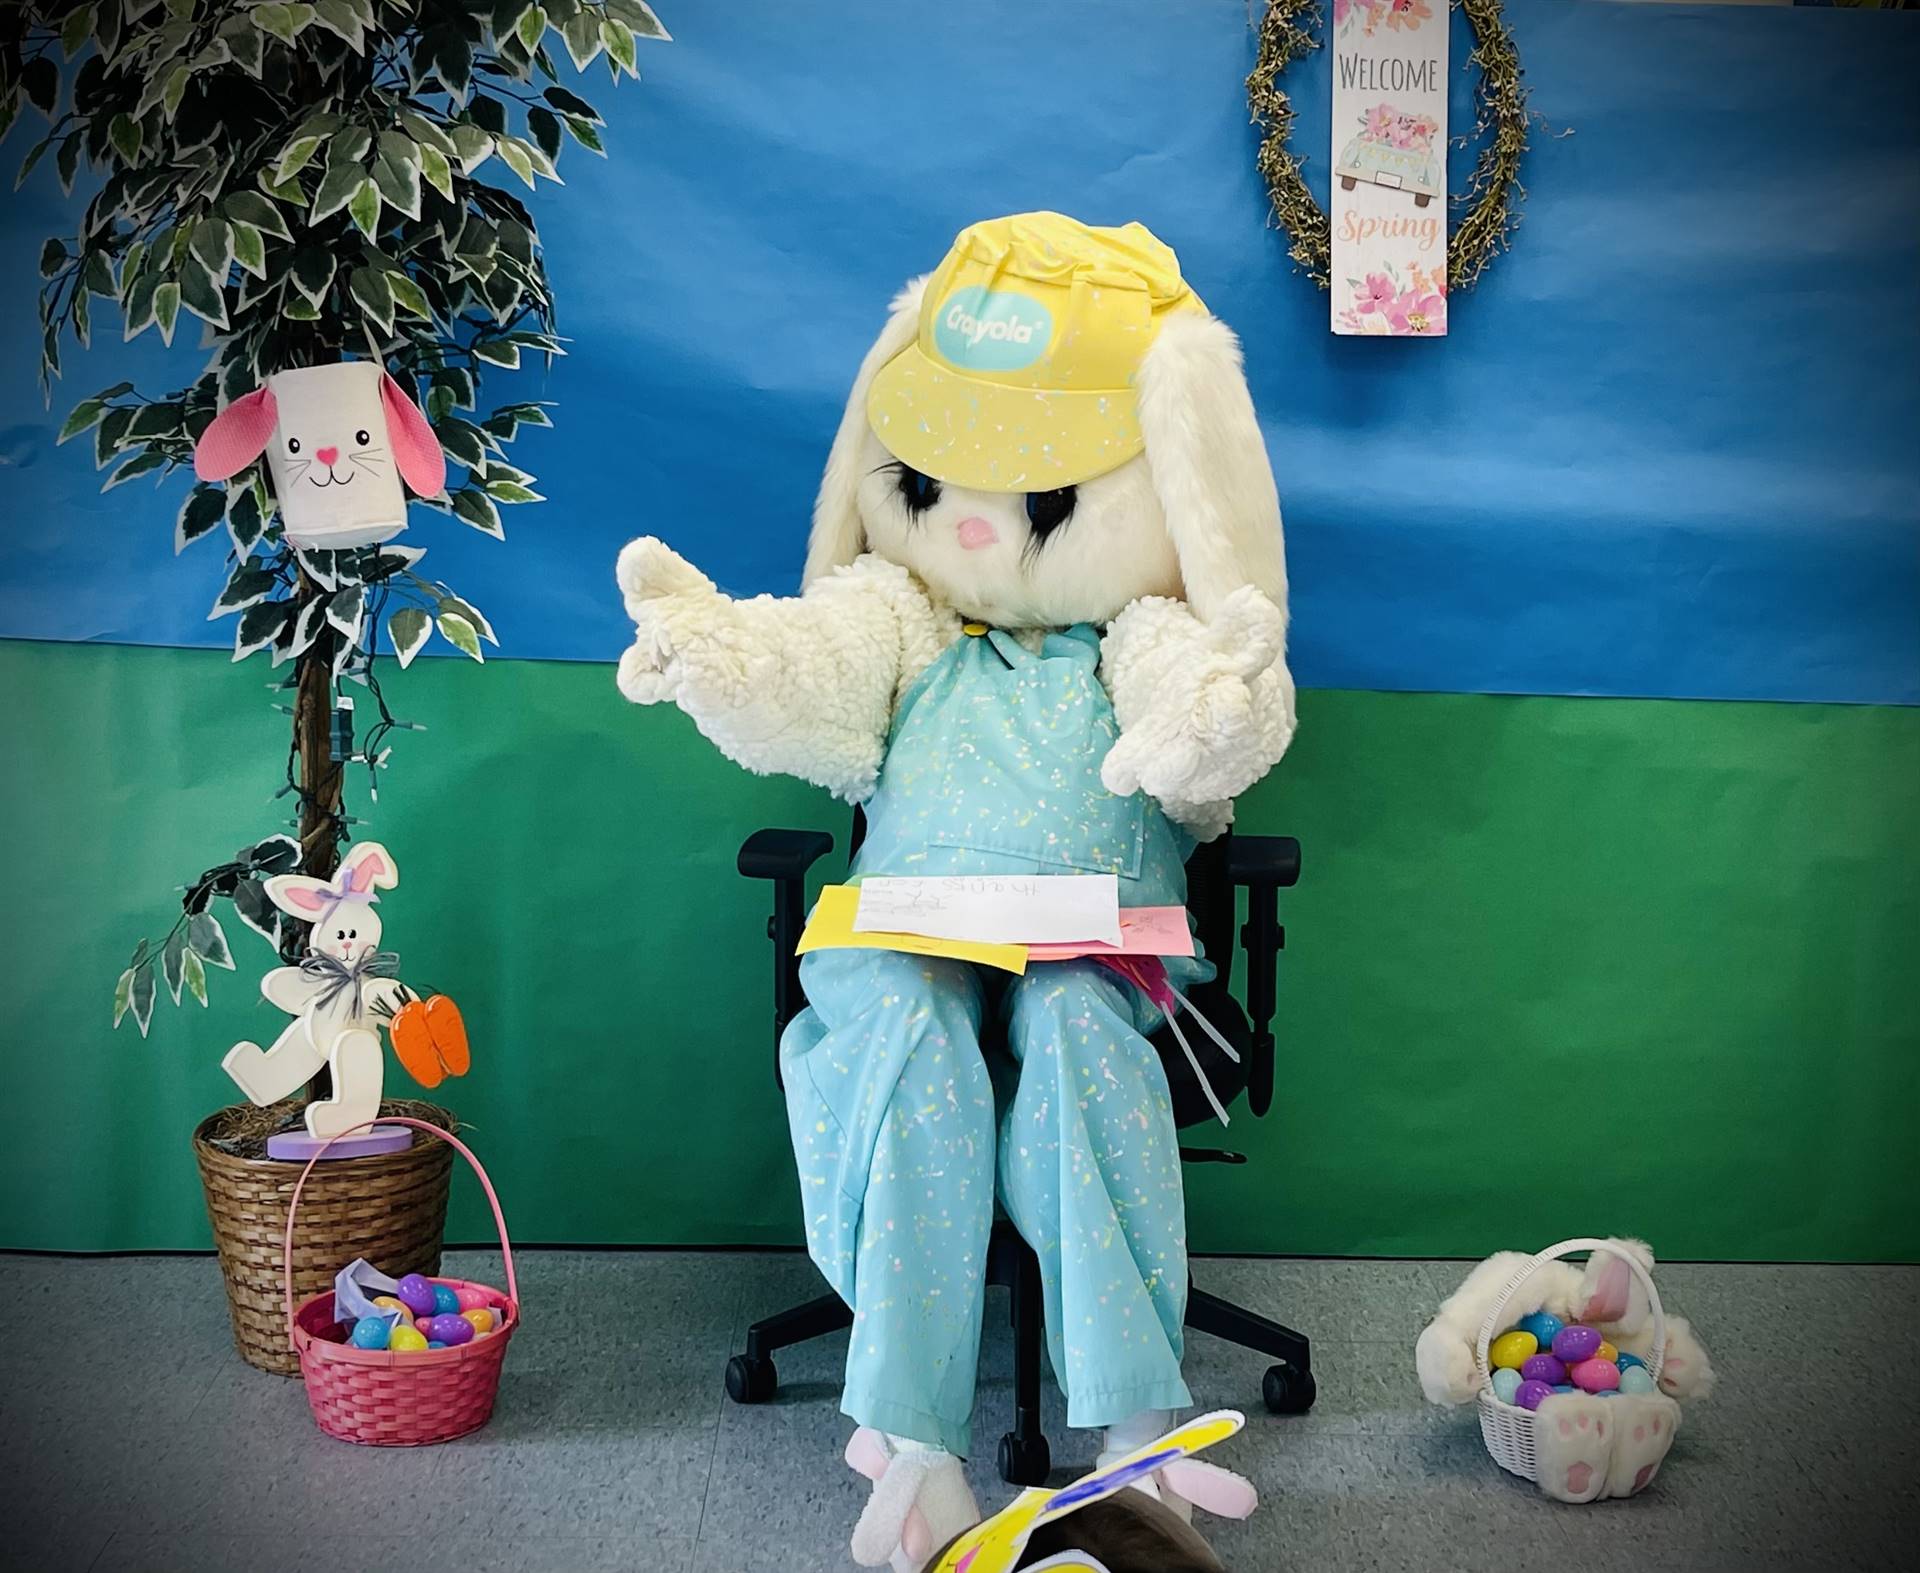 Adult dressed as a spring bunny sits on chair with blue and green background.